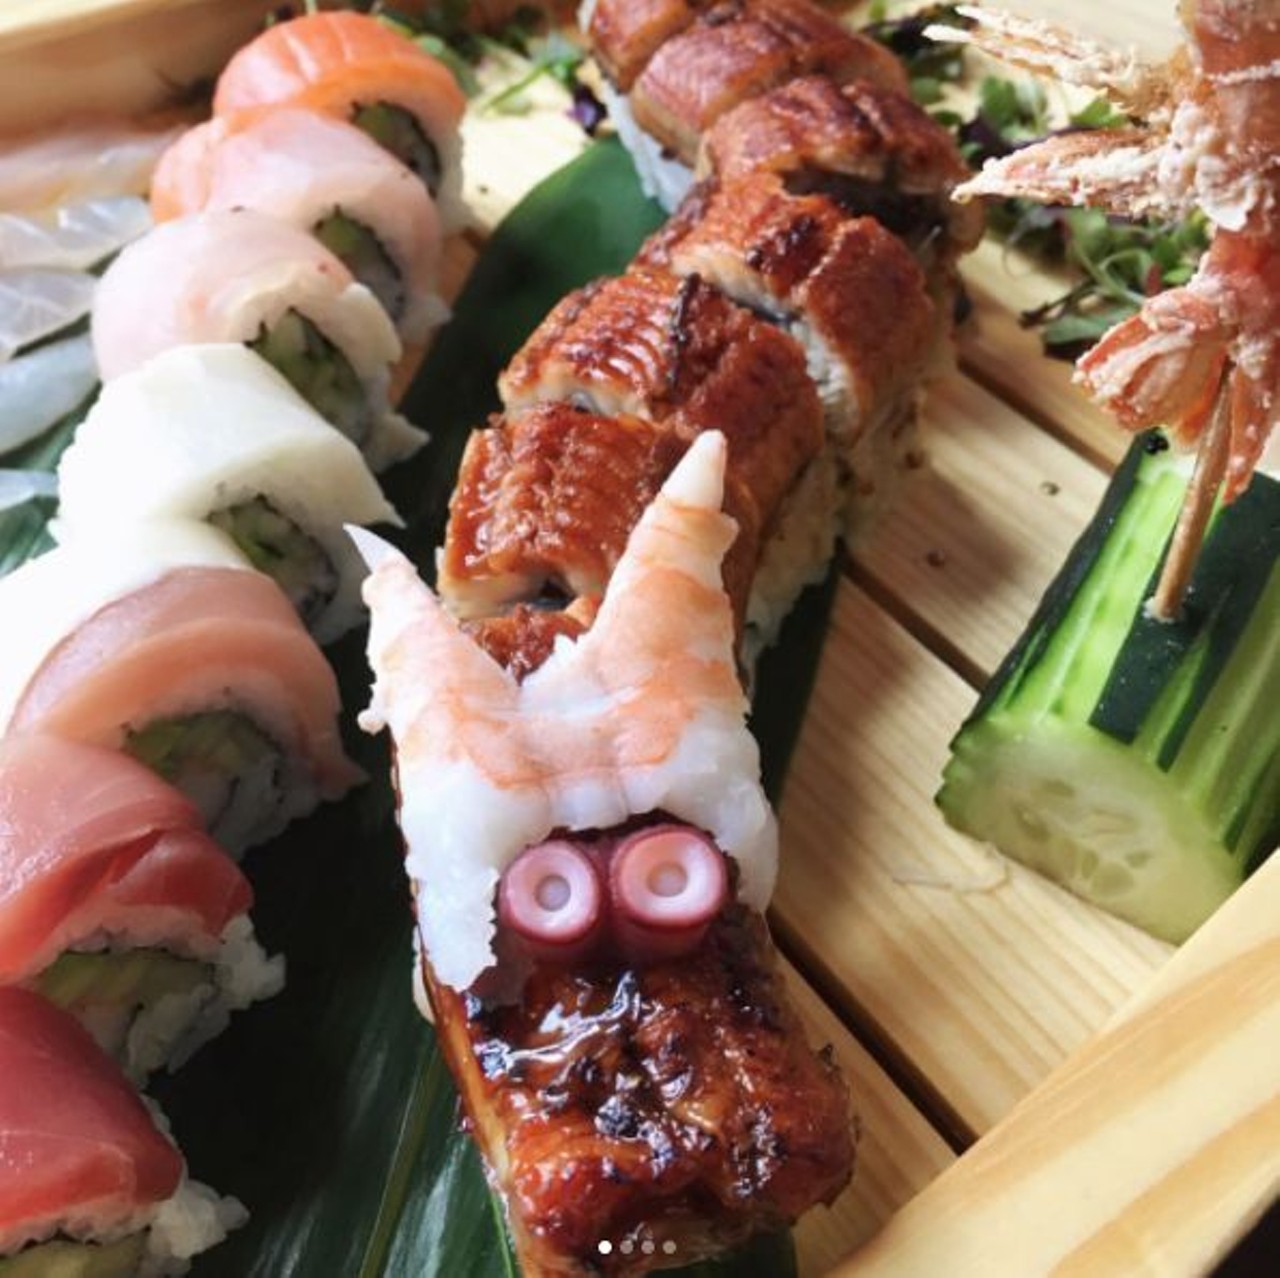 Uni&#146;ko Japanese House
17803 La Cantera Terrace #1101, (210) 239-6610
Their dragon rosso roll looks like an actual dragon. Visit chef Andres Castro for his insane plating and more. 
Photo via Instagram, sunshinehuuu